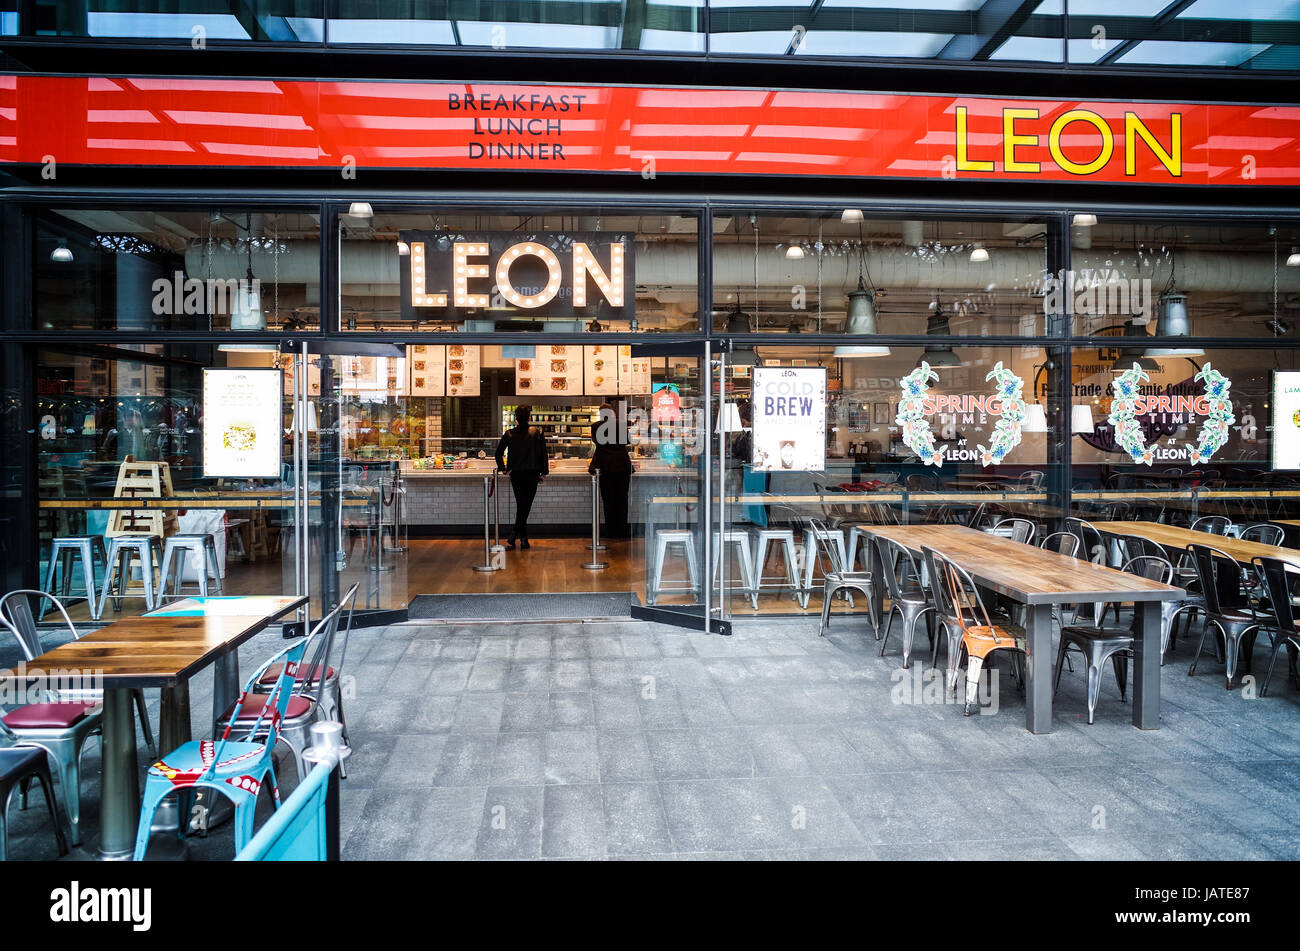 The Leon restaurant in London's redeveloped Spitalfields Market. Leon is a chain of 40+ restaurants setup in 2004 to provide natural fast food. Stock Photo